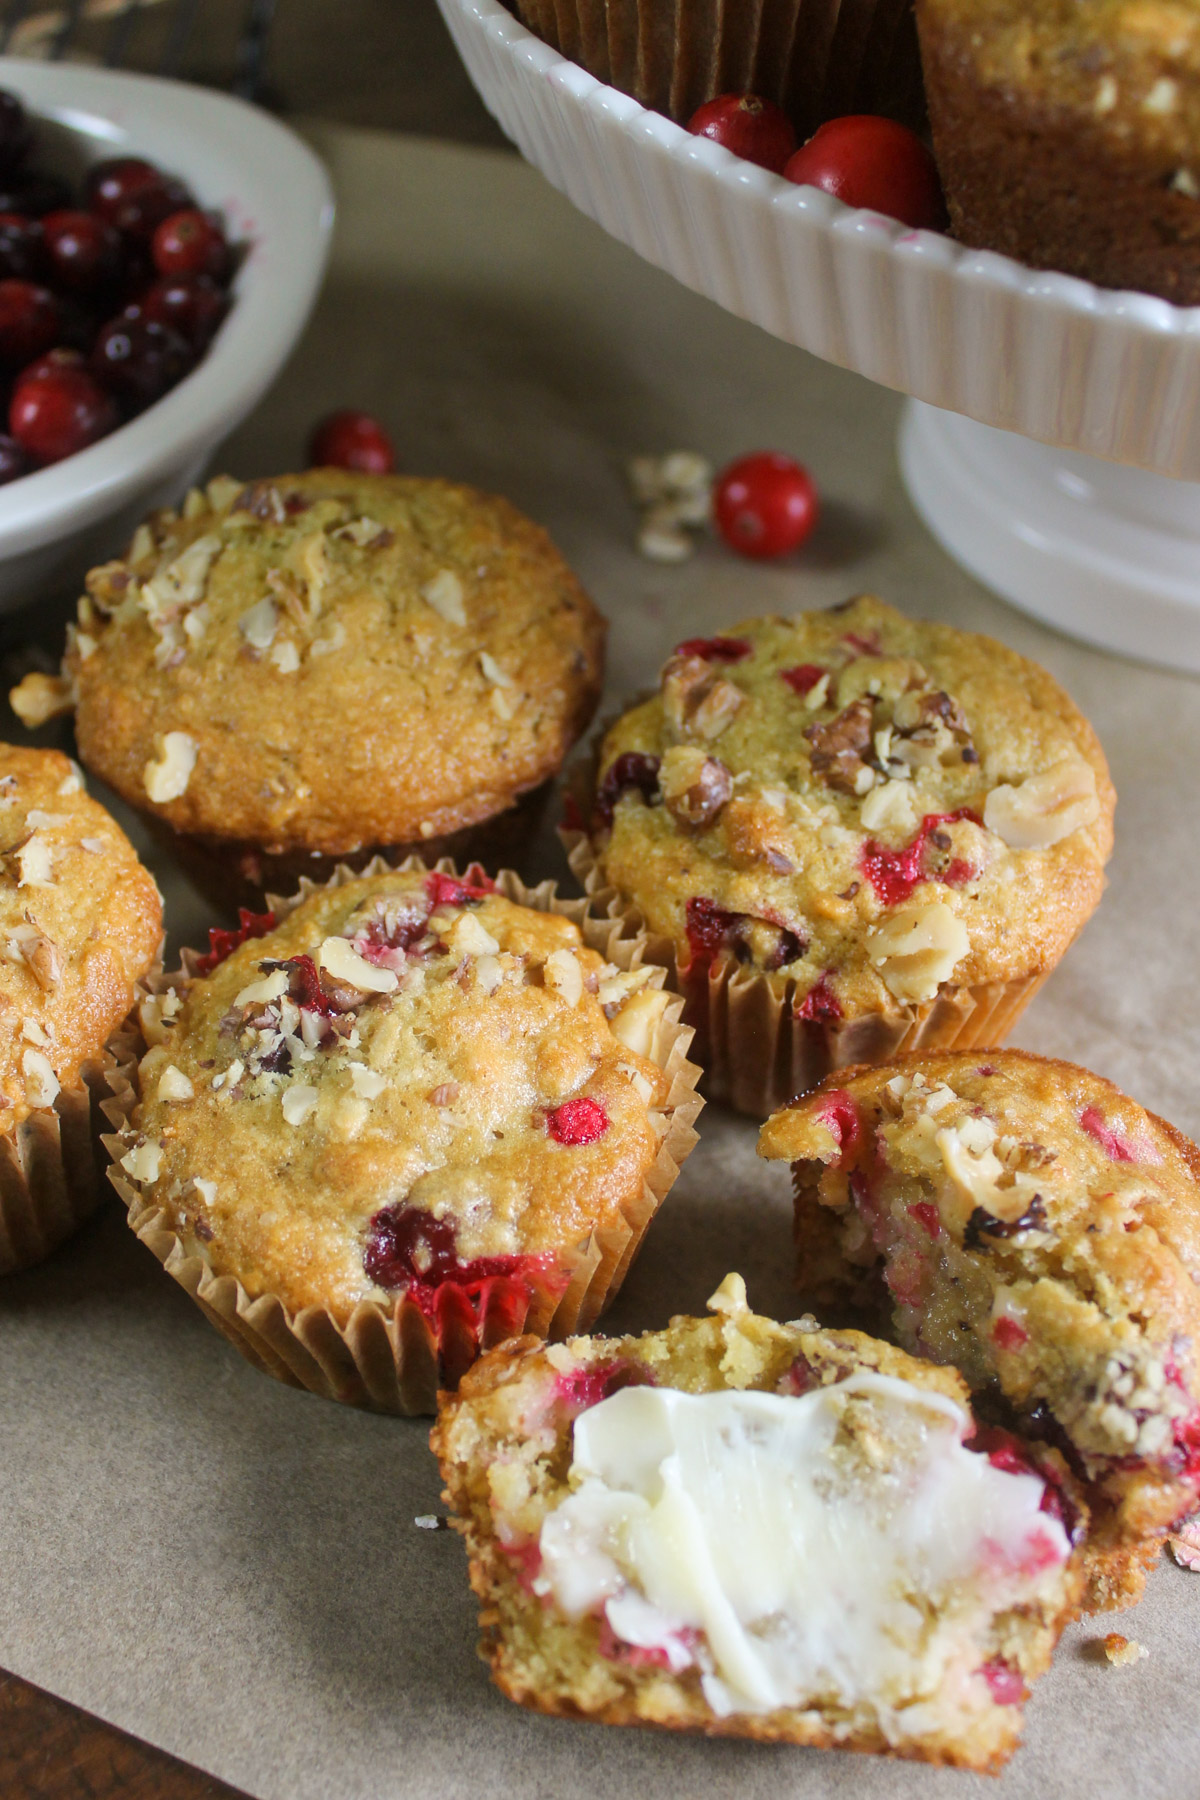 Cranberry muffins on parchment paper under a white cake stand with more muffins.